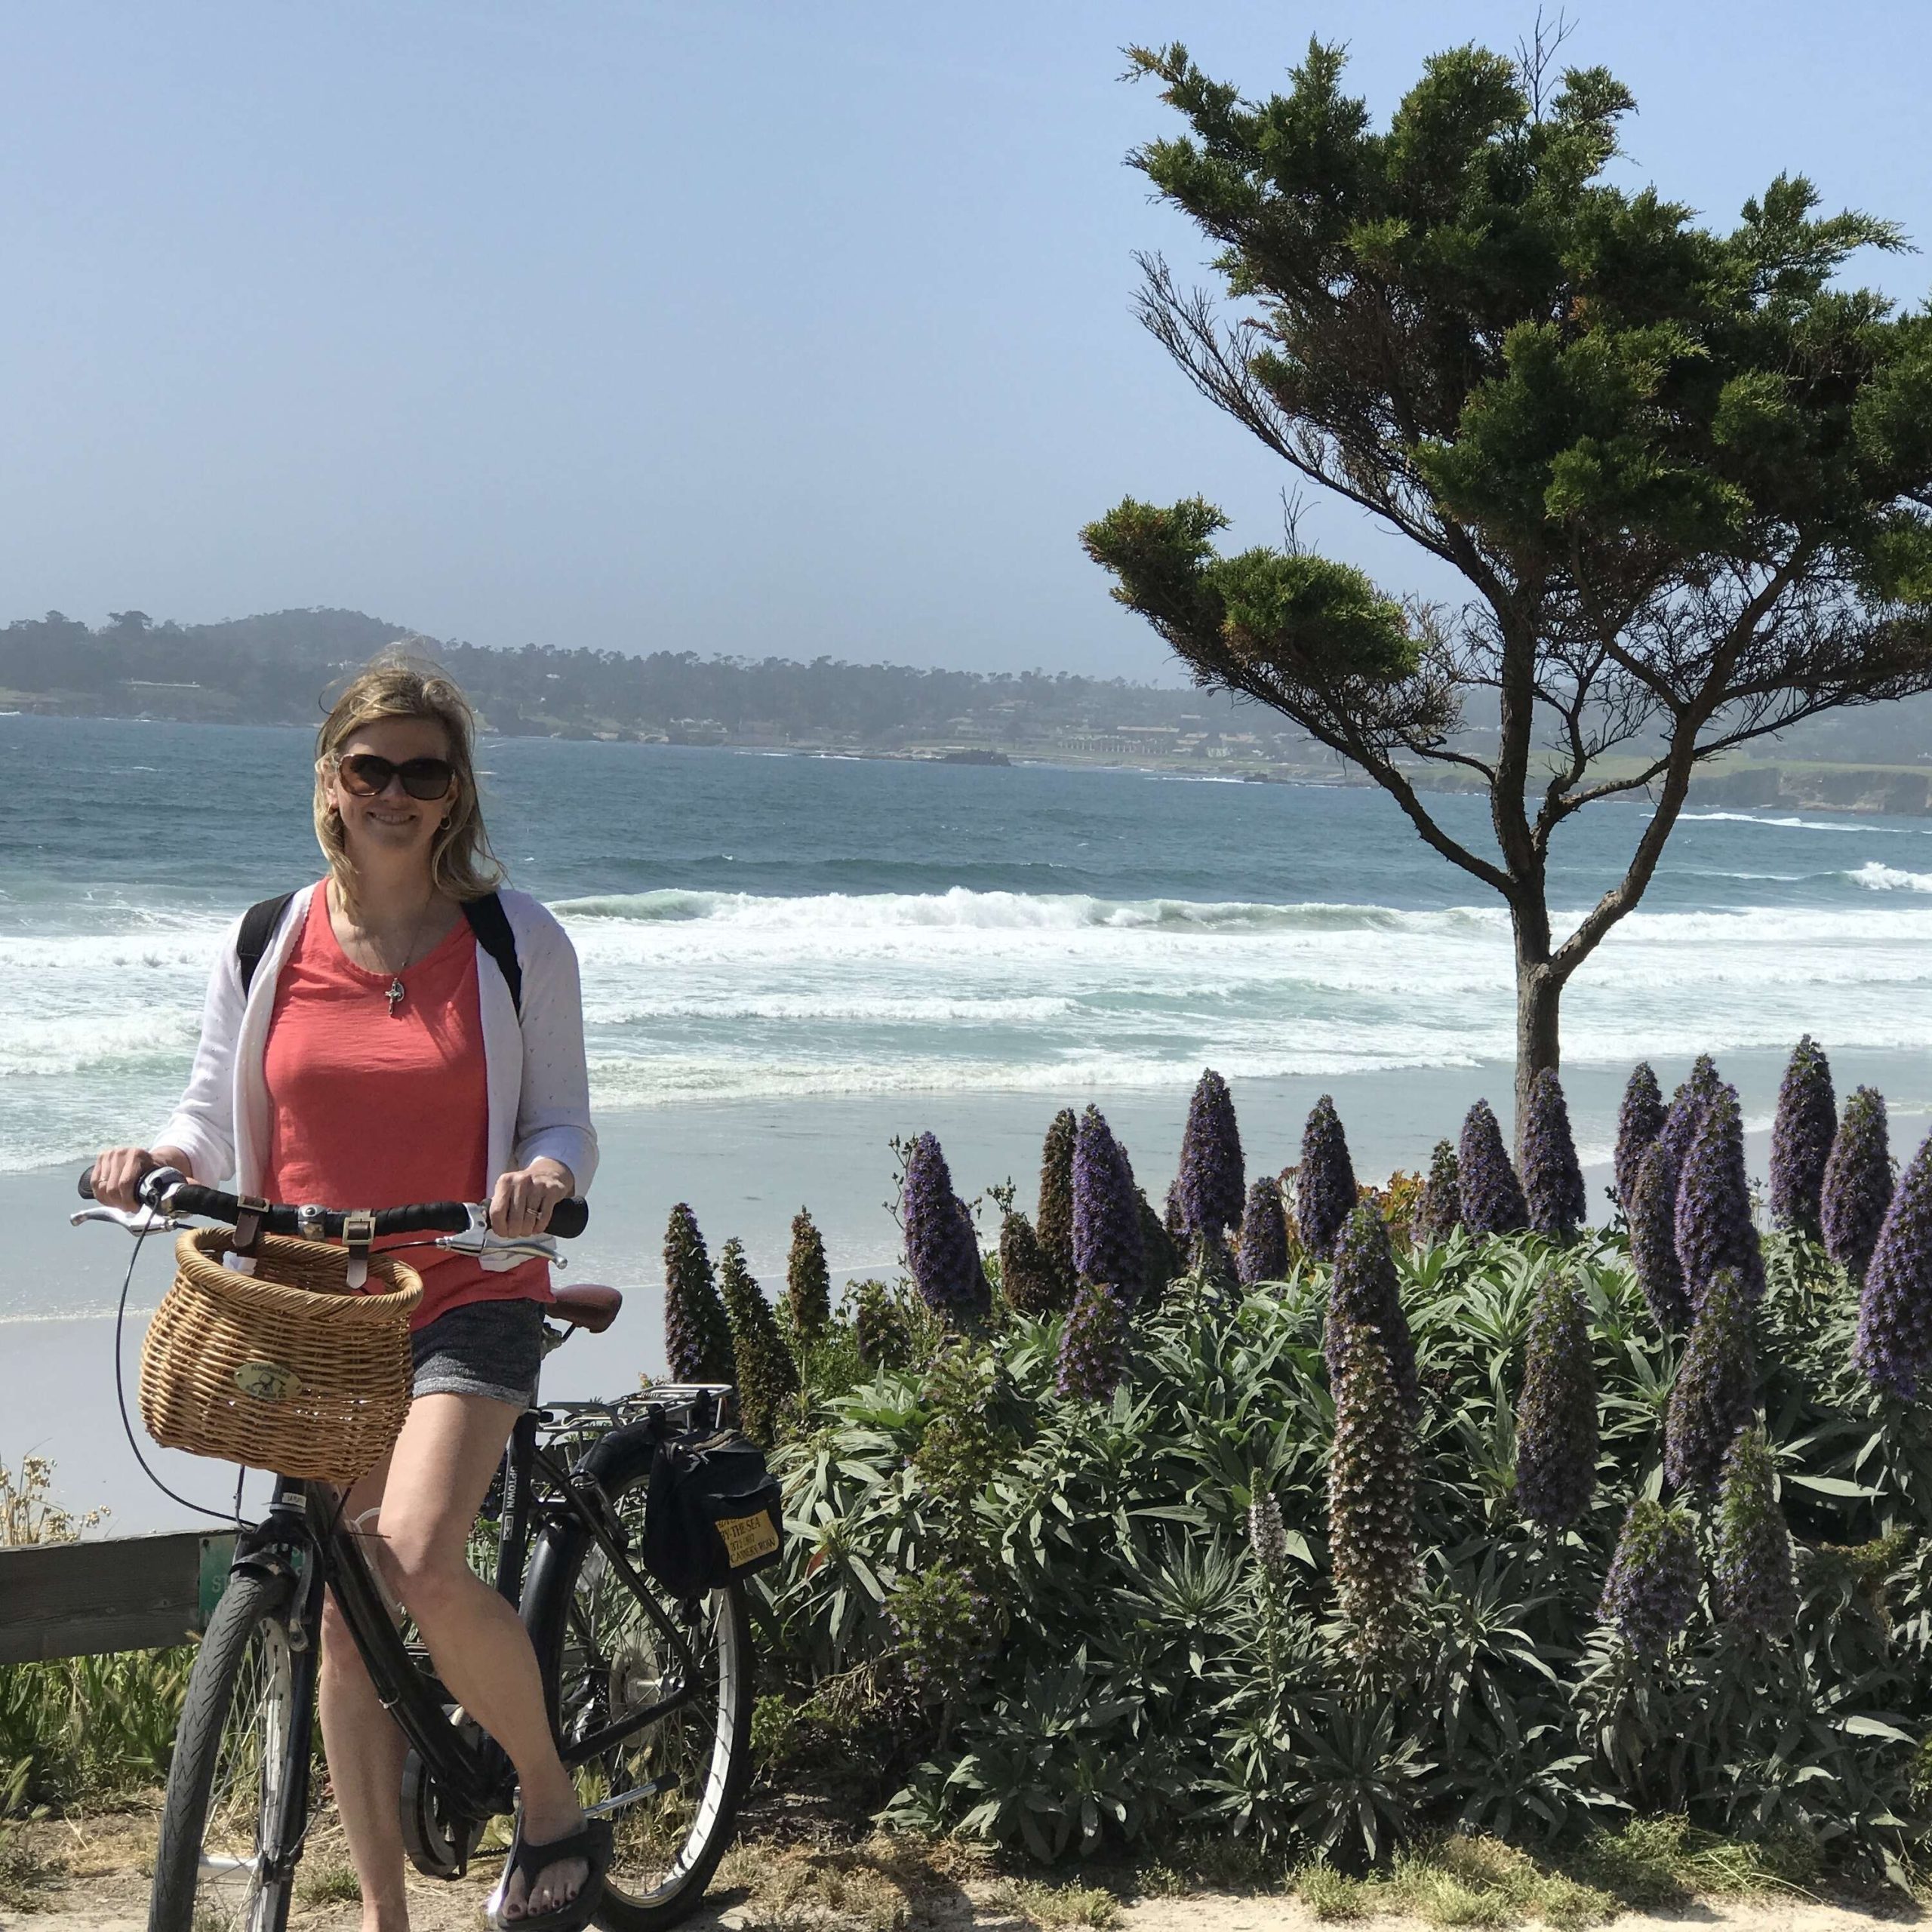 A woman on a bicycle next to the ocean.